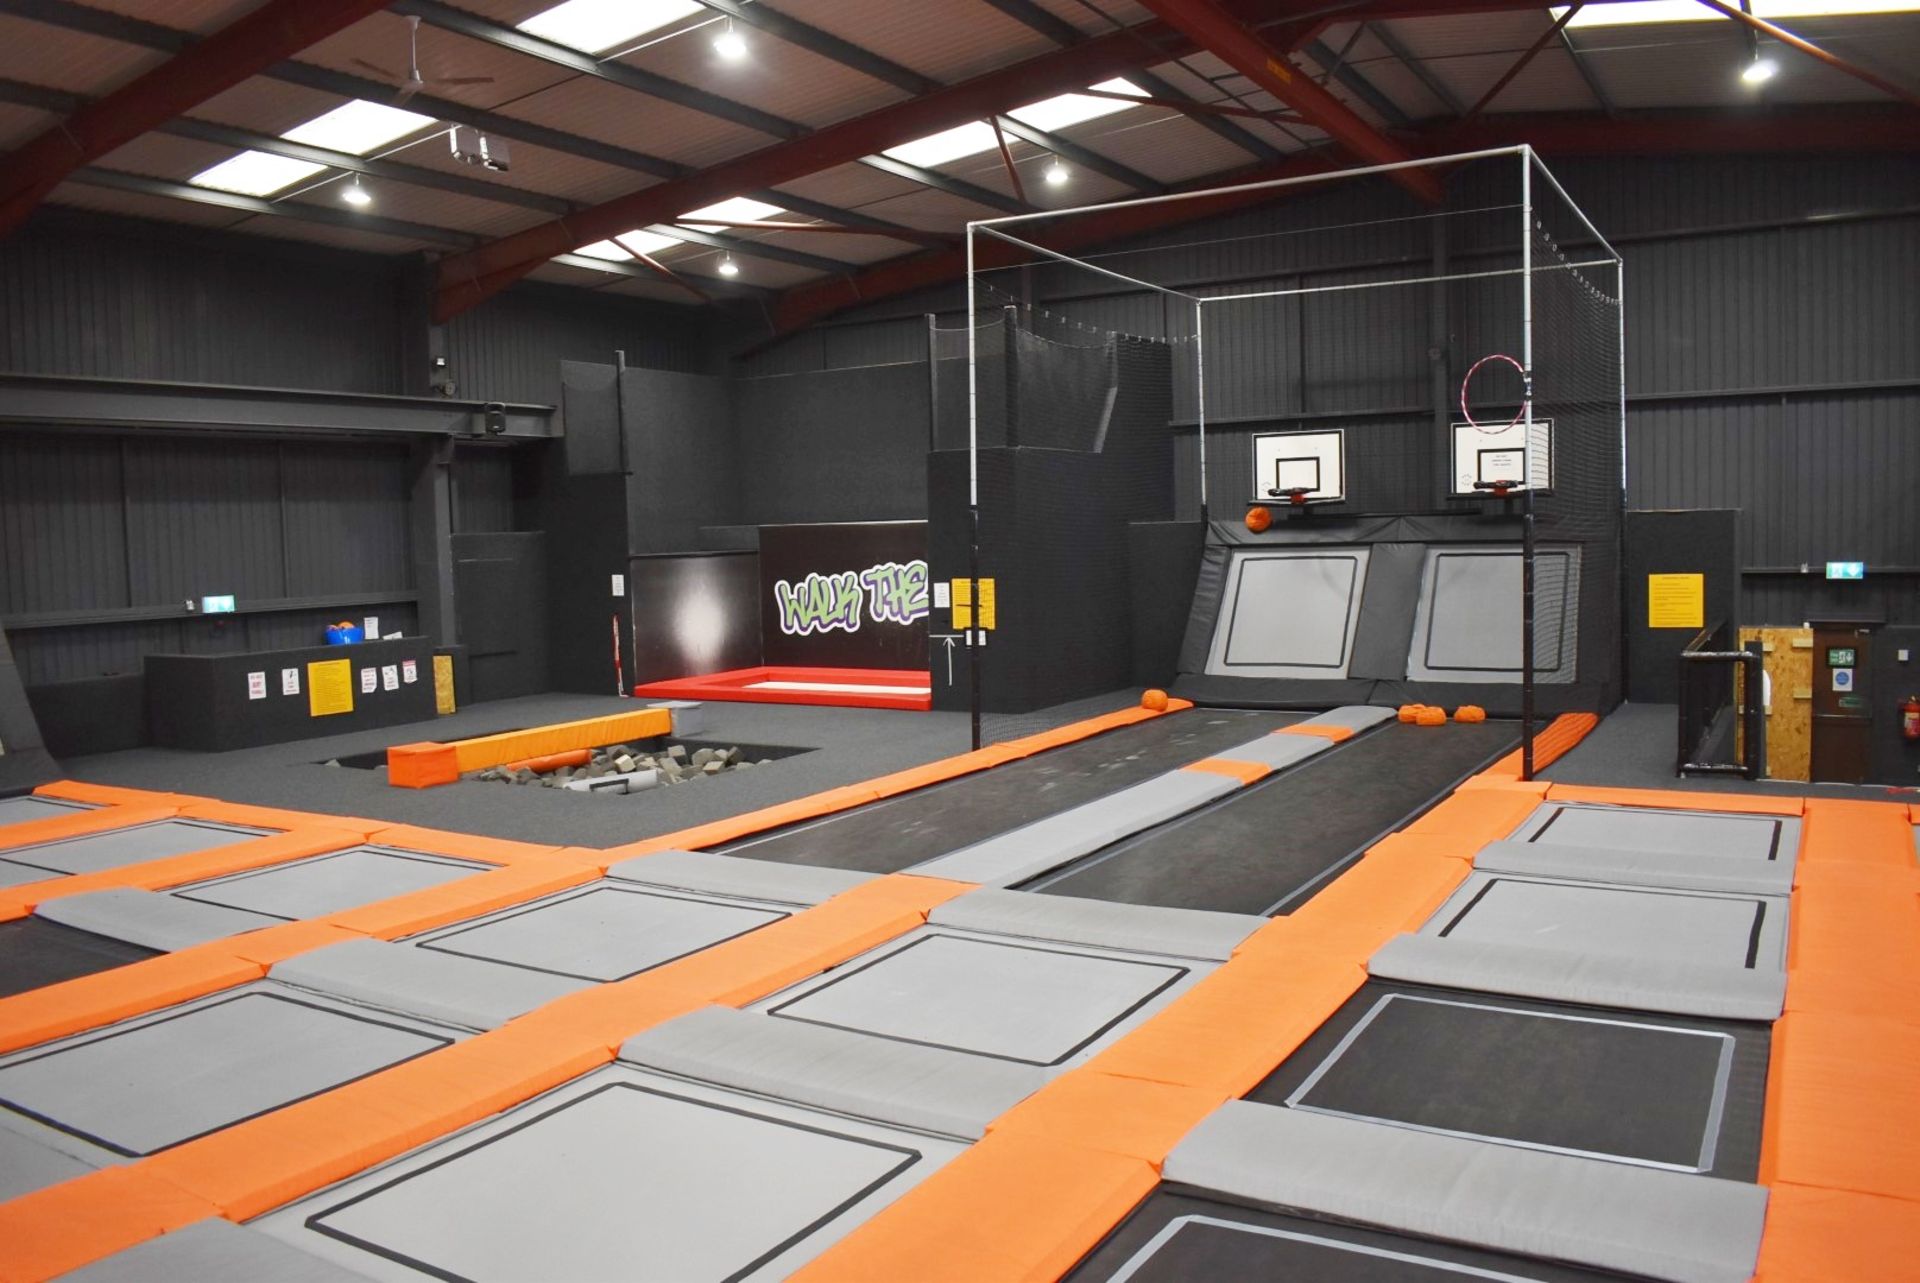 1 x Large Trampoline Park - Disassembled - Includes Dodgeball Arena And Jump Tower - CL766  - - Image 24 of 99